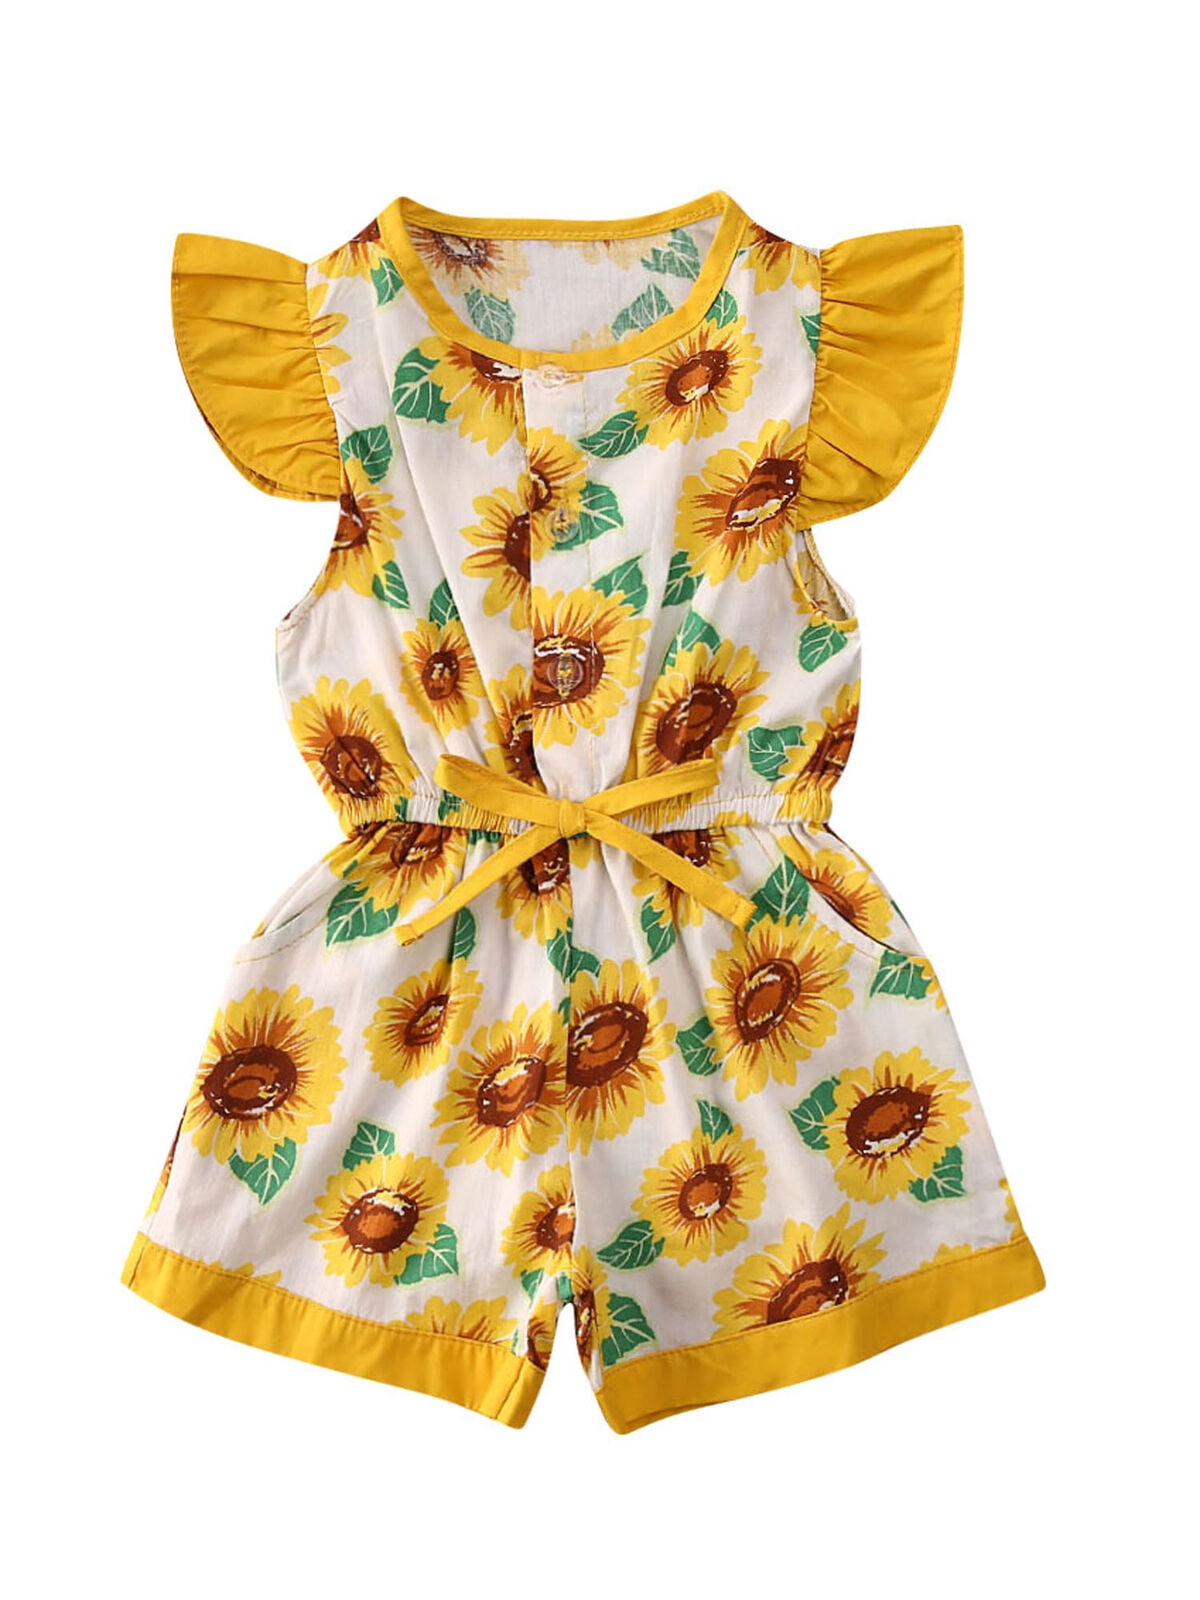 Fashion Toddler Baby Girls Sunflower Printed Romper Jumpsuit Playsuit ...